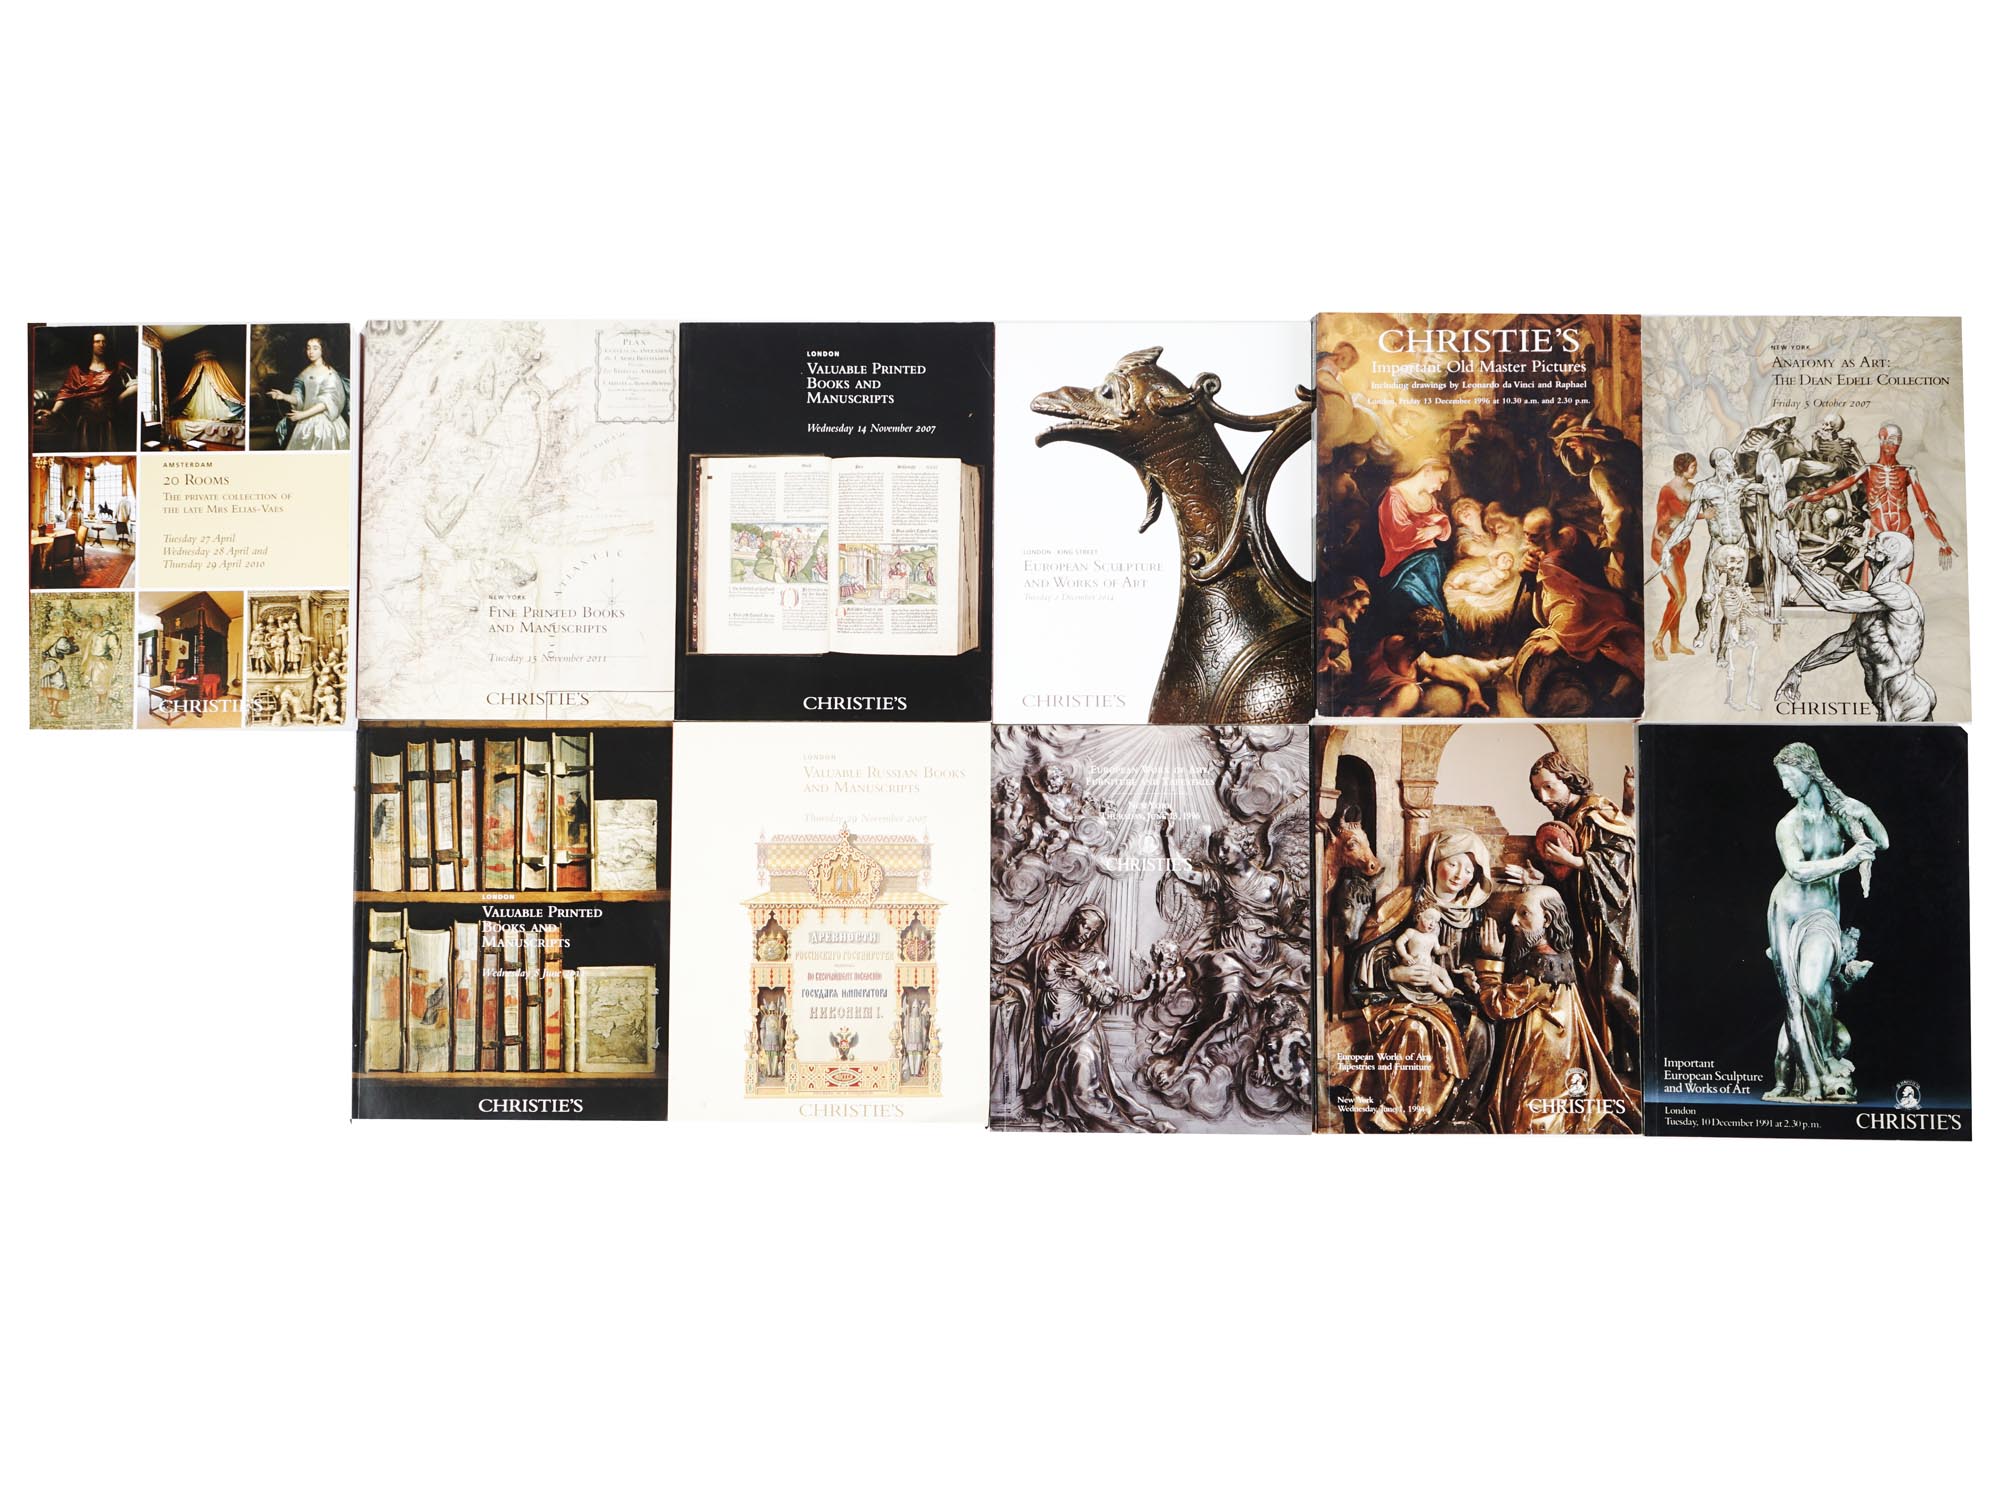 CHRISTIES AUCTION CATALOGUES ART AND MANUSCRIPTS PIC-0